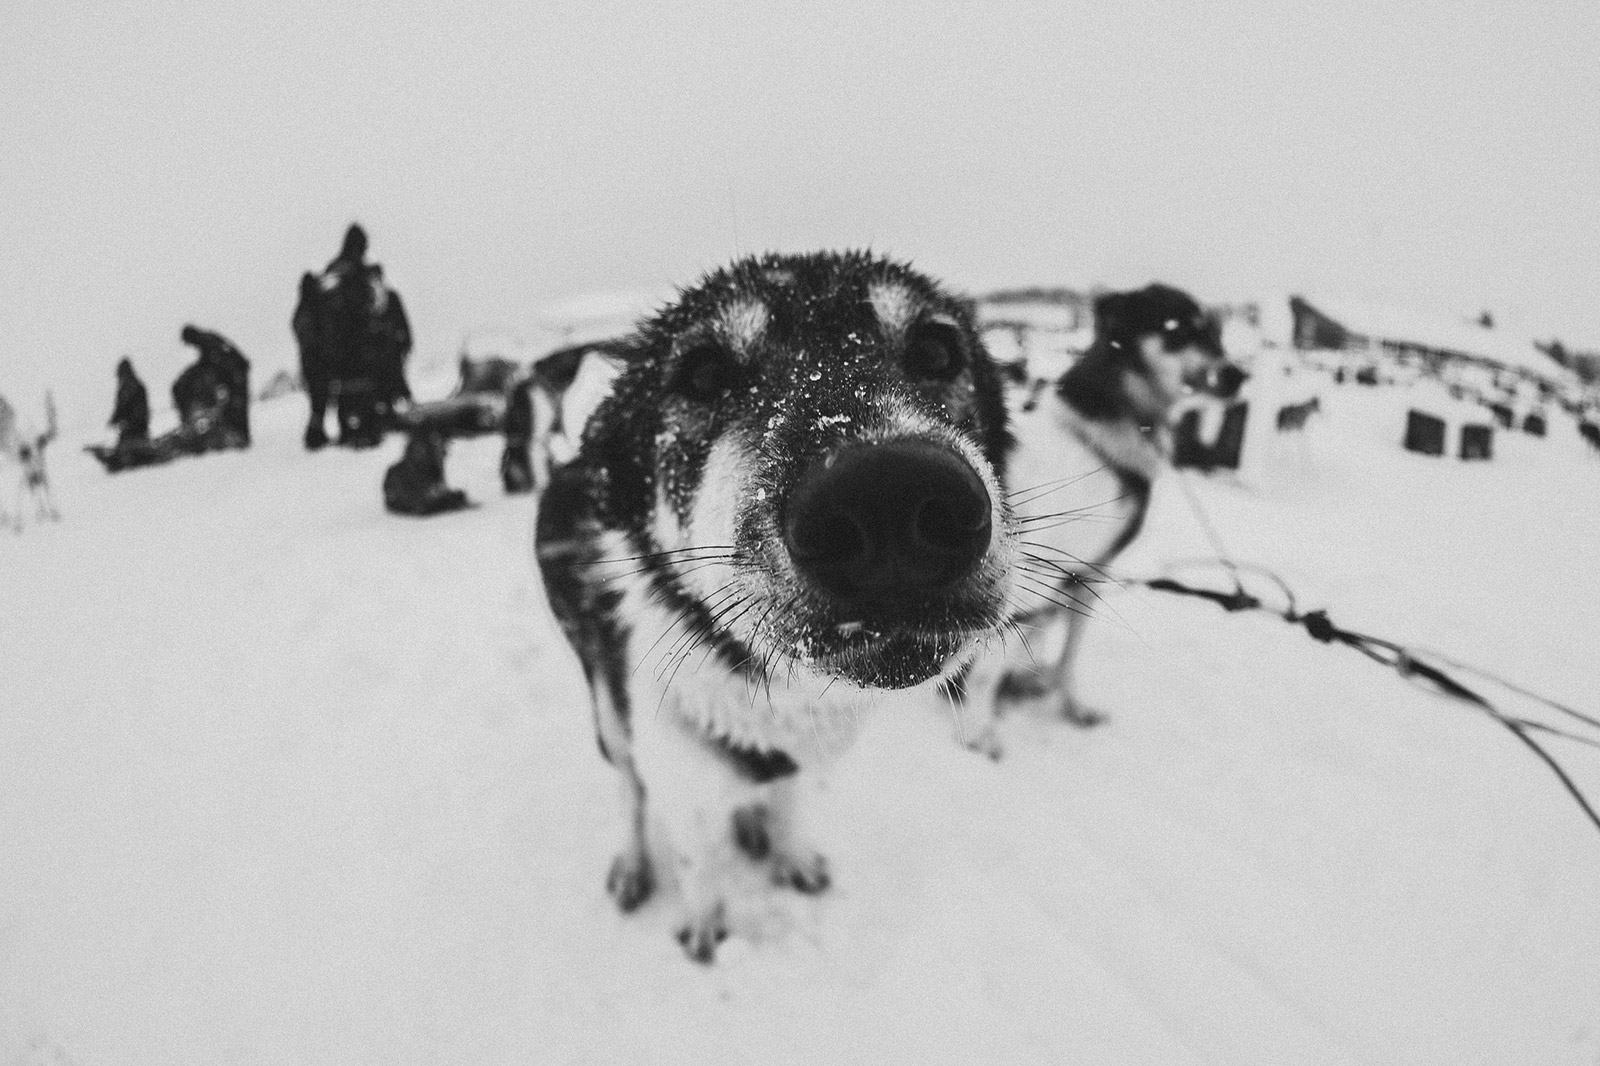 Closeup of sled dog in Norway